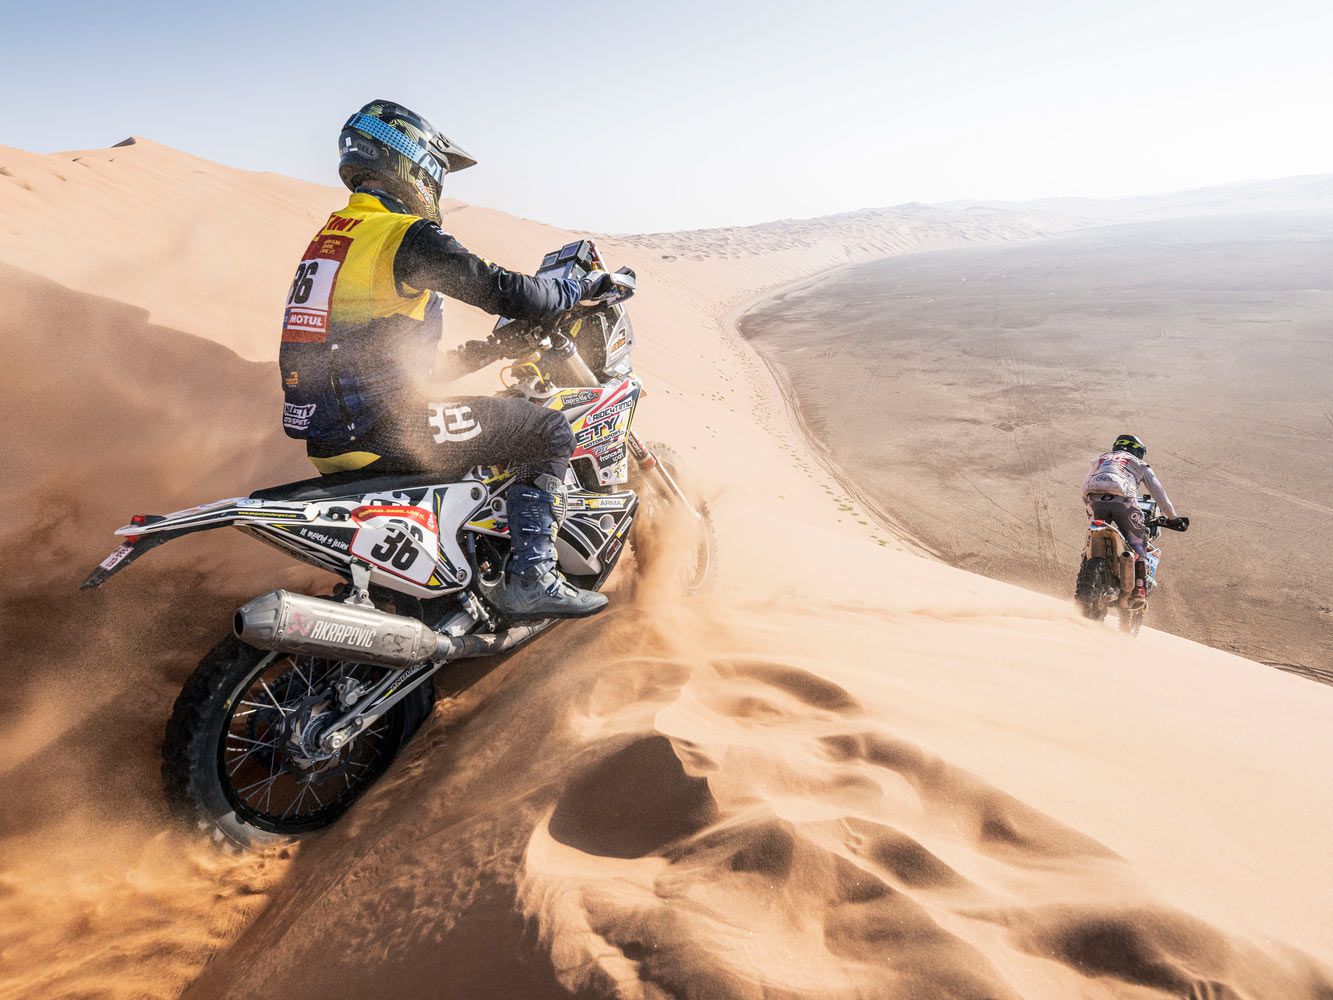 Better to lead or follow? Jerome Martiny’s Team Dumontier Racing Husqvarna, left, heads into the Empty Quarter during Stage 11.